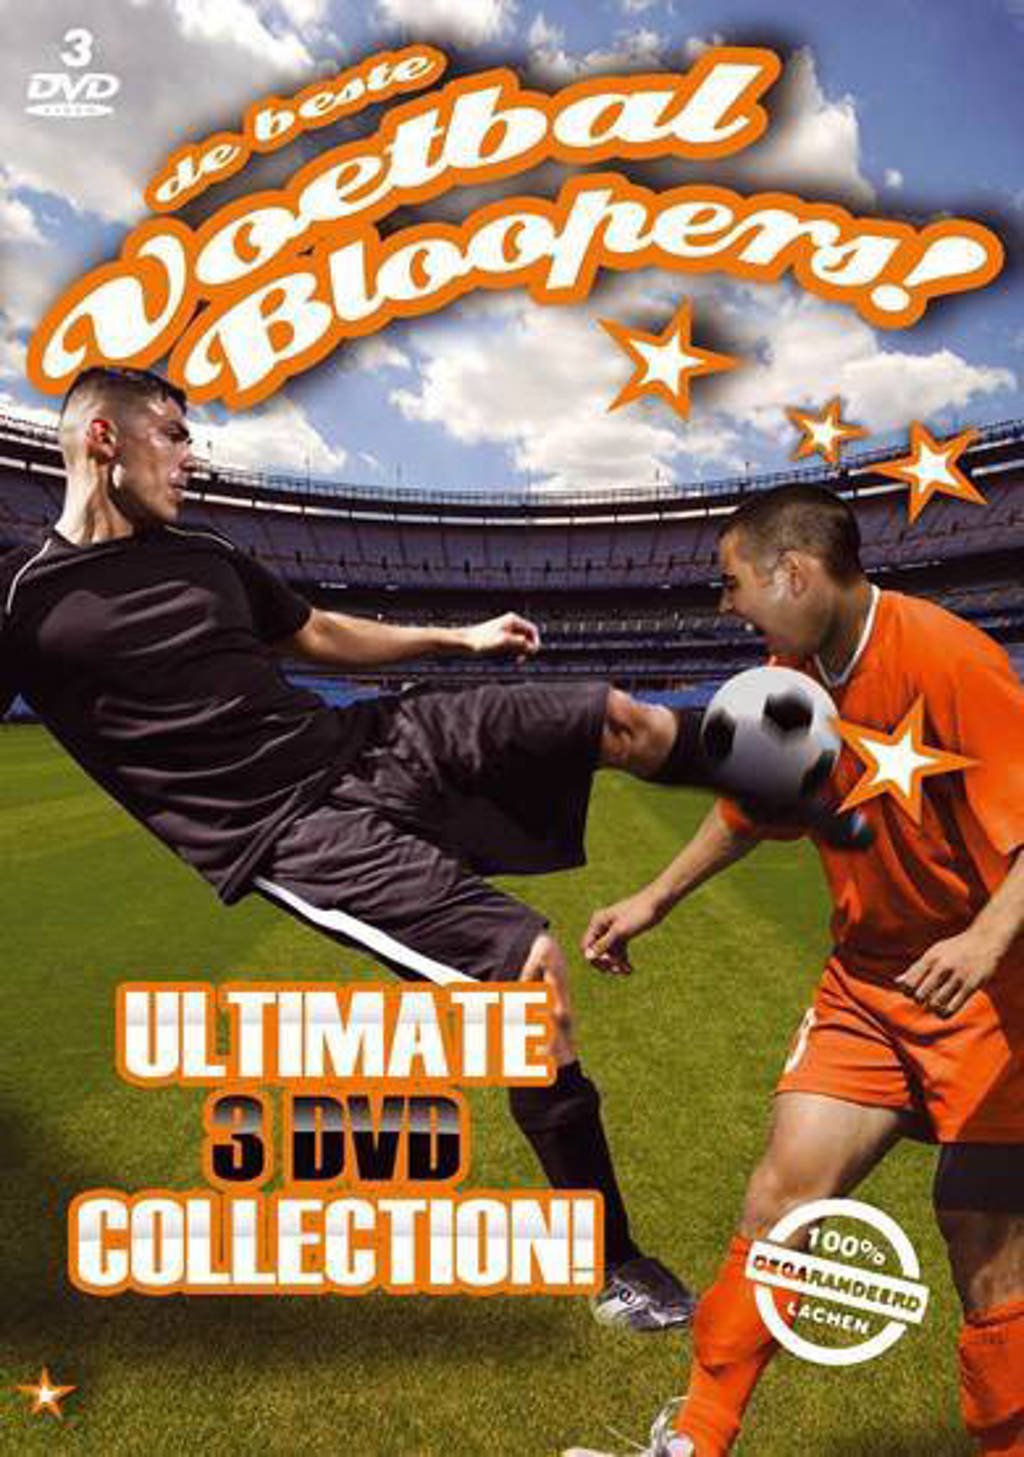 Beste Voetbal Bloopers - Ultimate Collection (DVD)